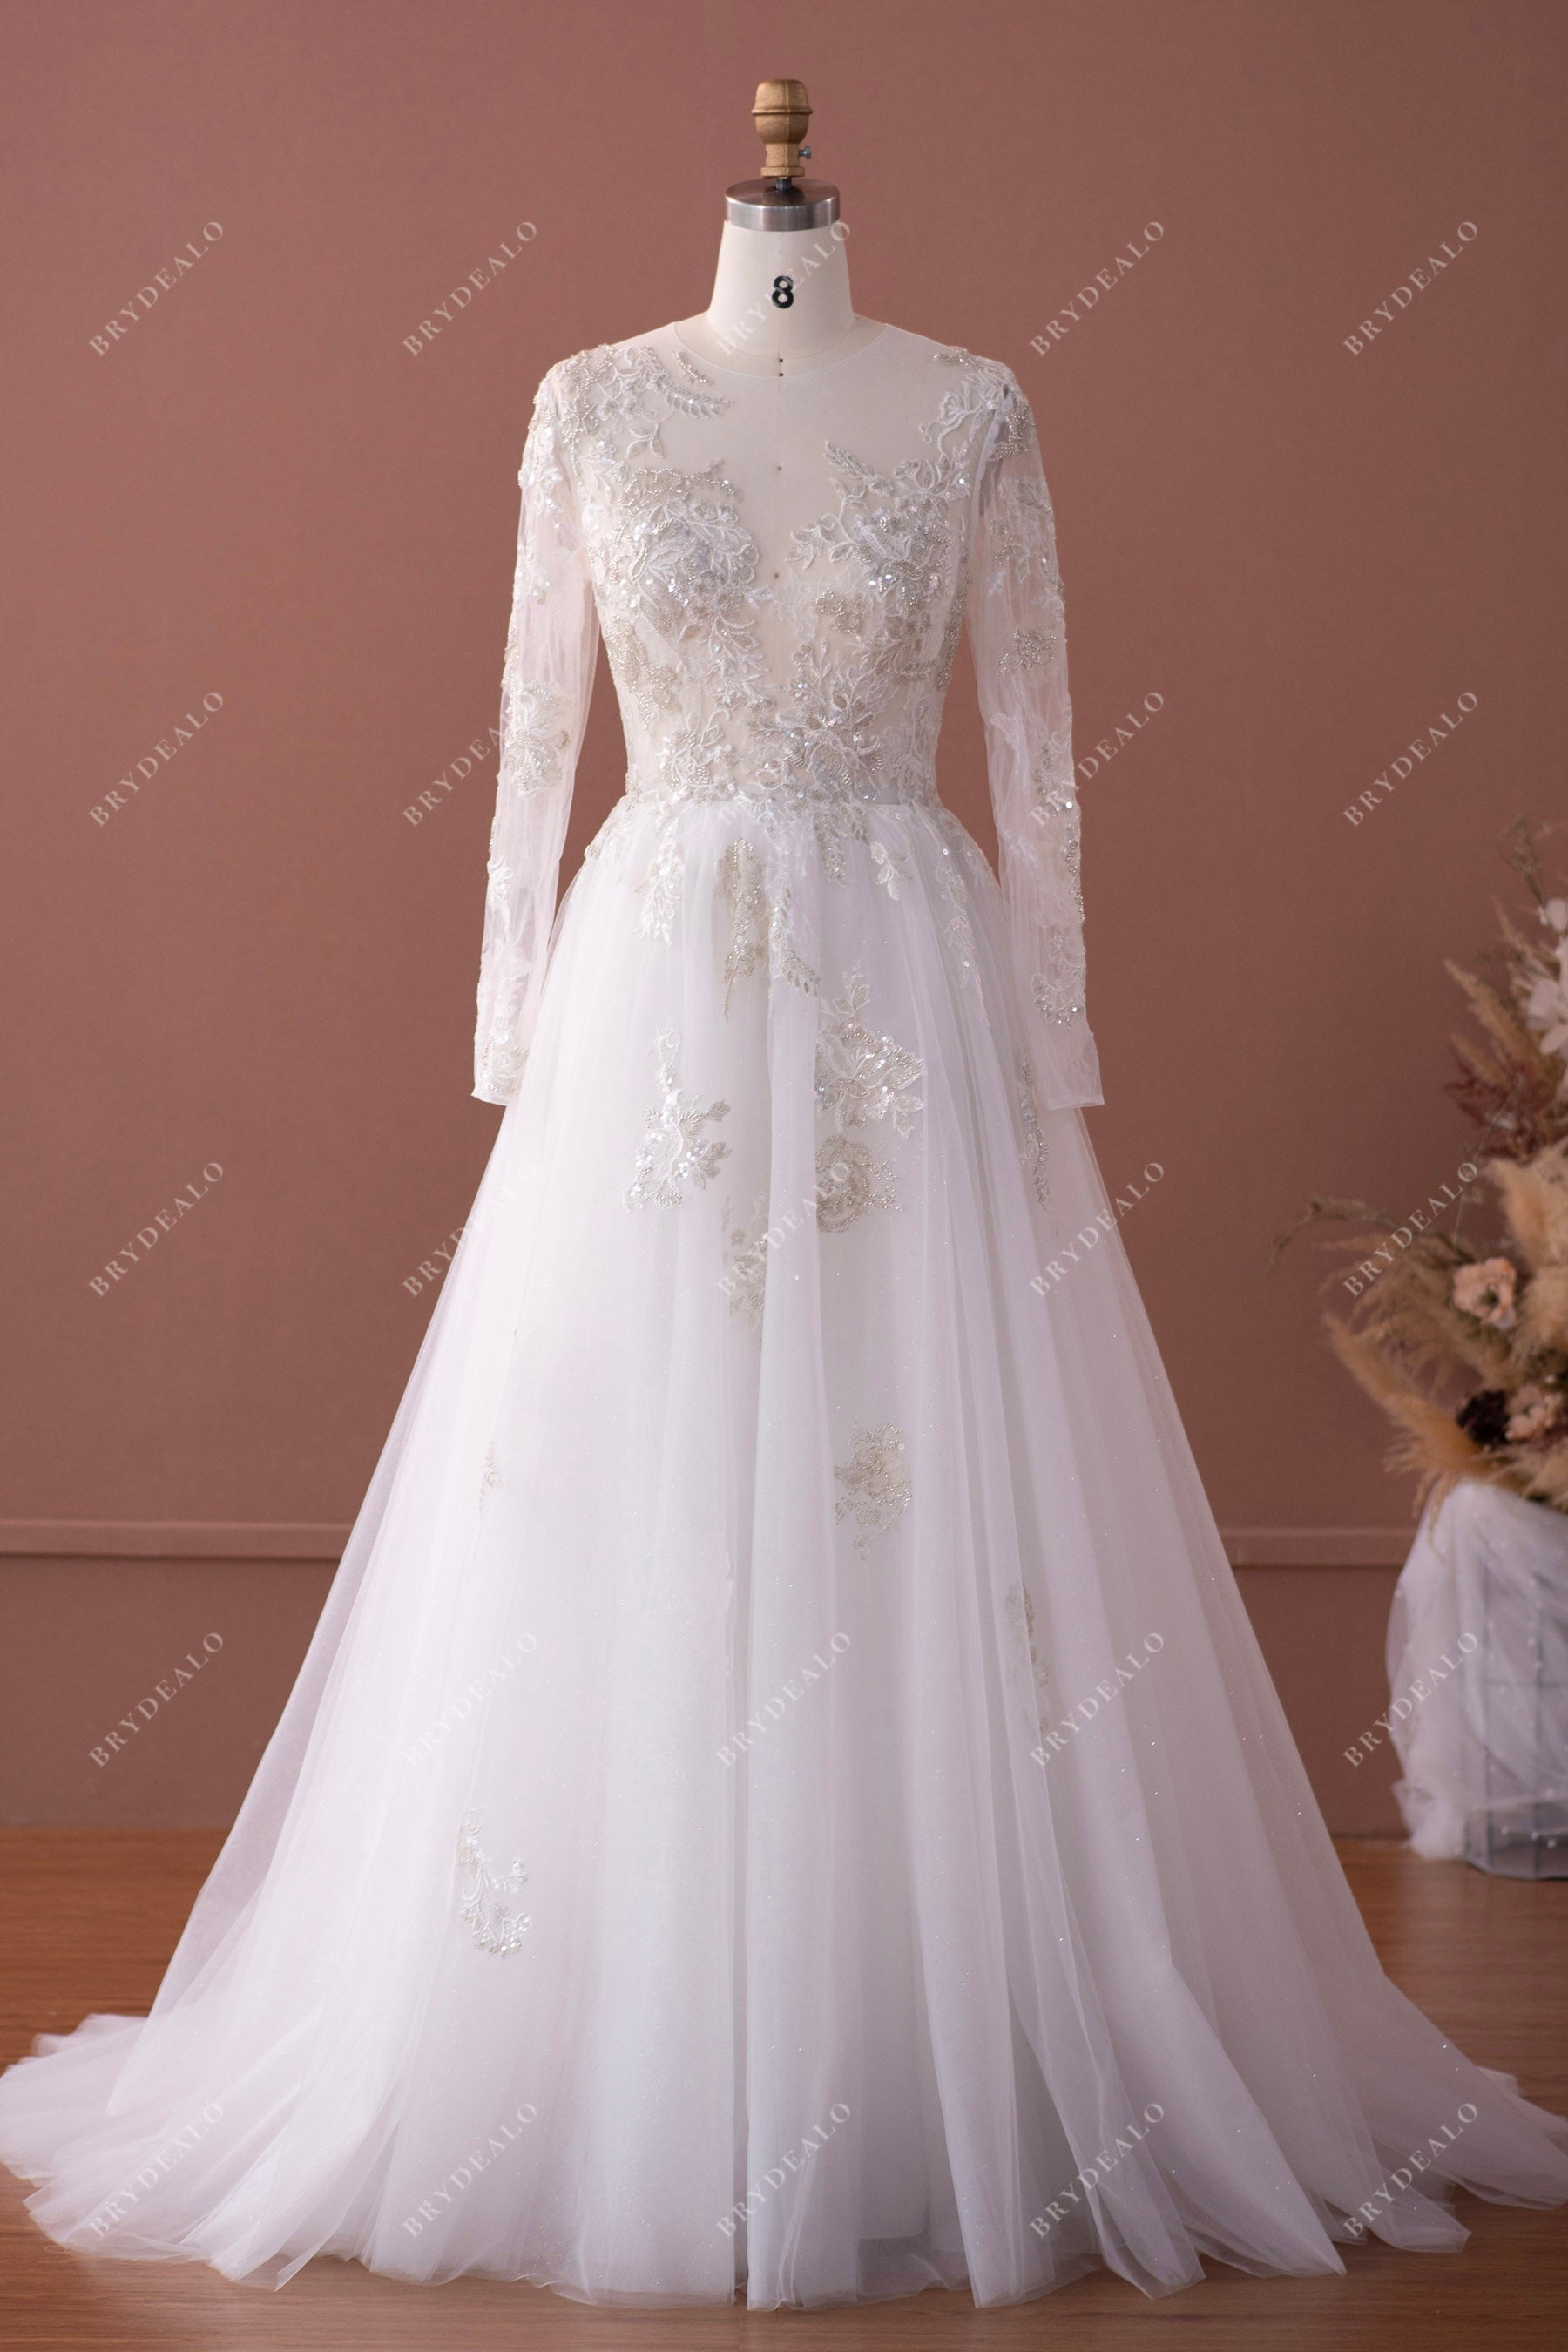 sheer long sleeves shimmery lace bridal gown